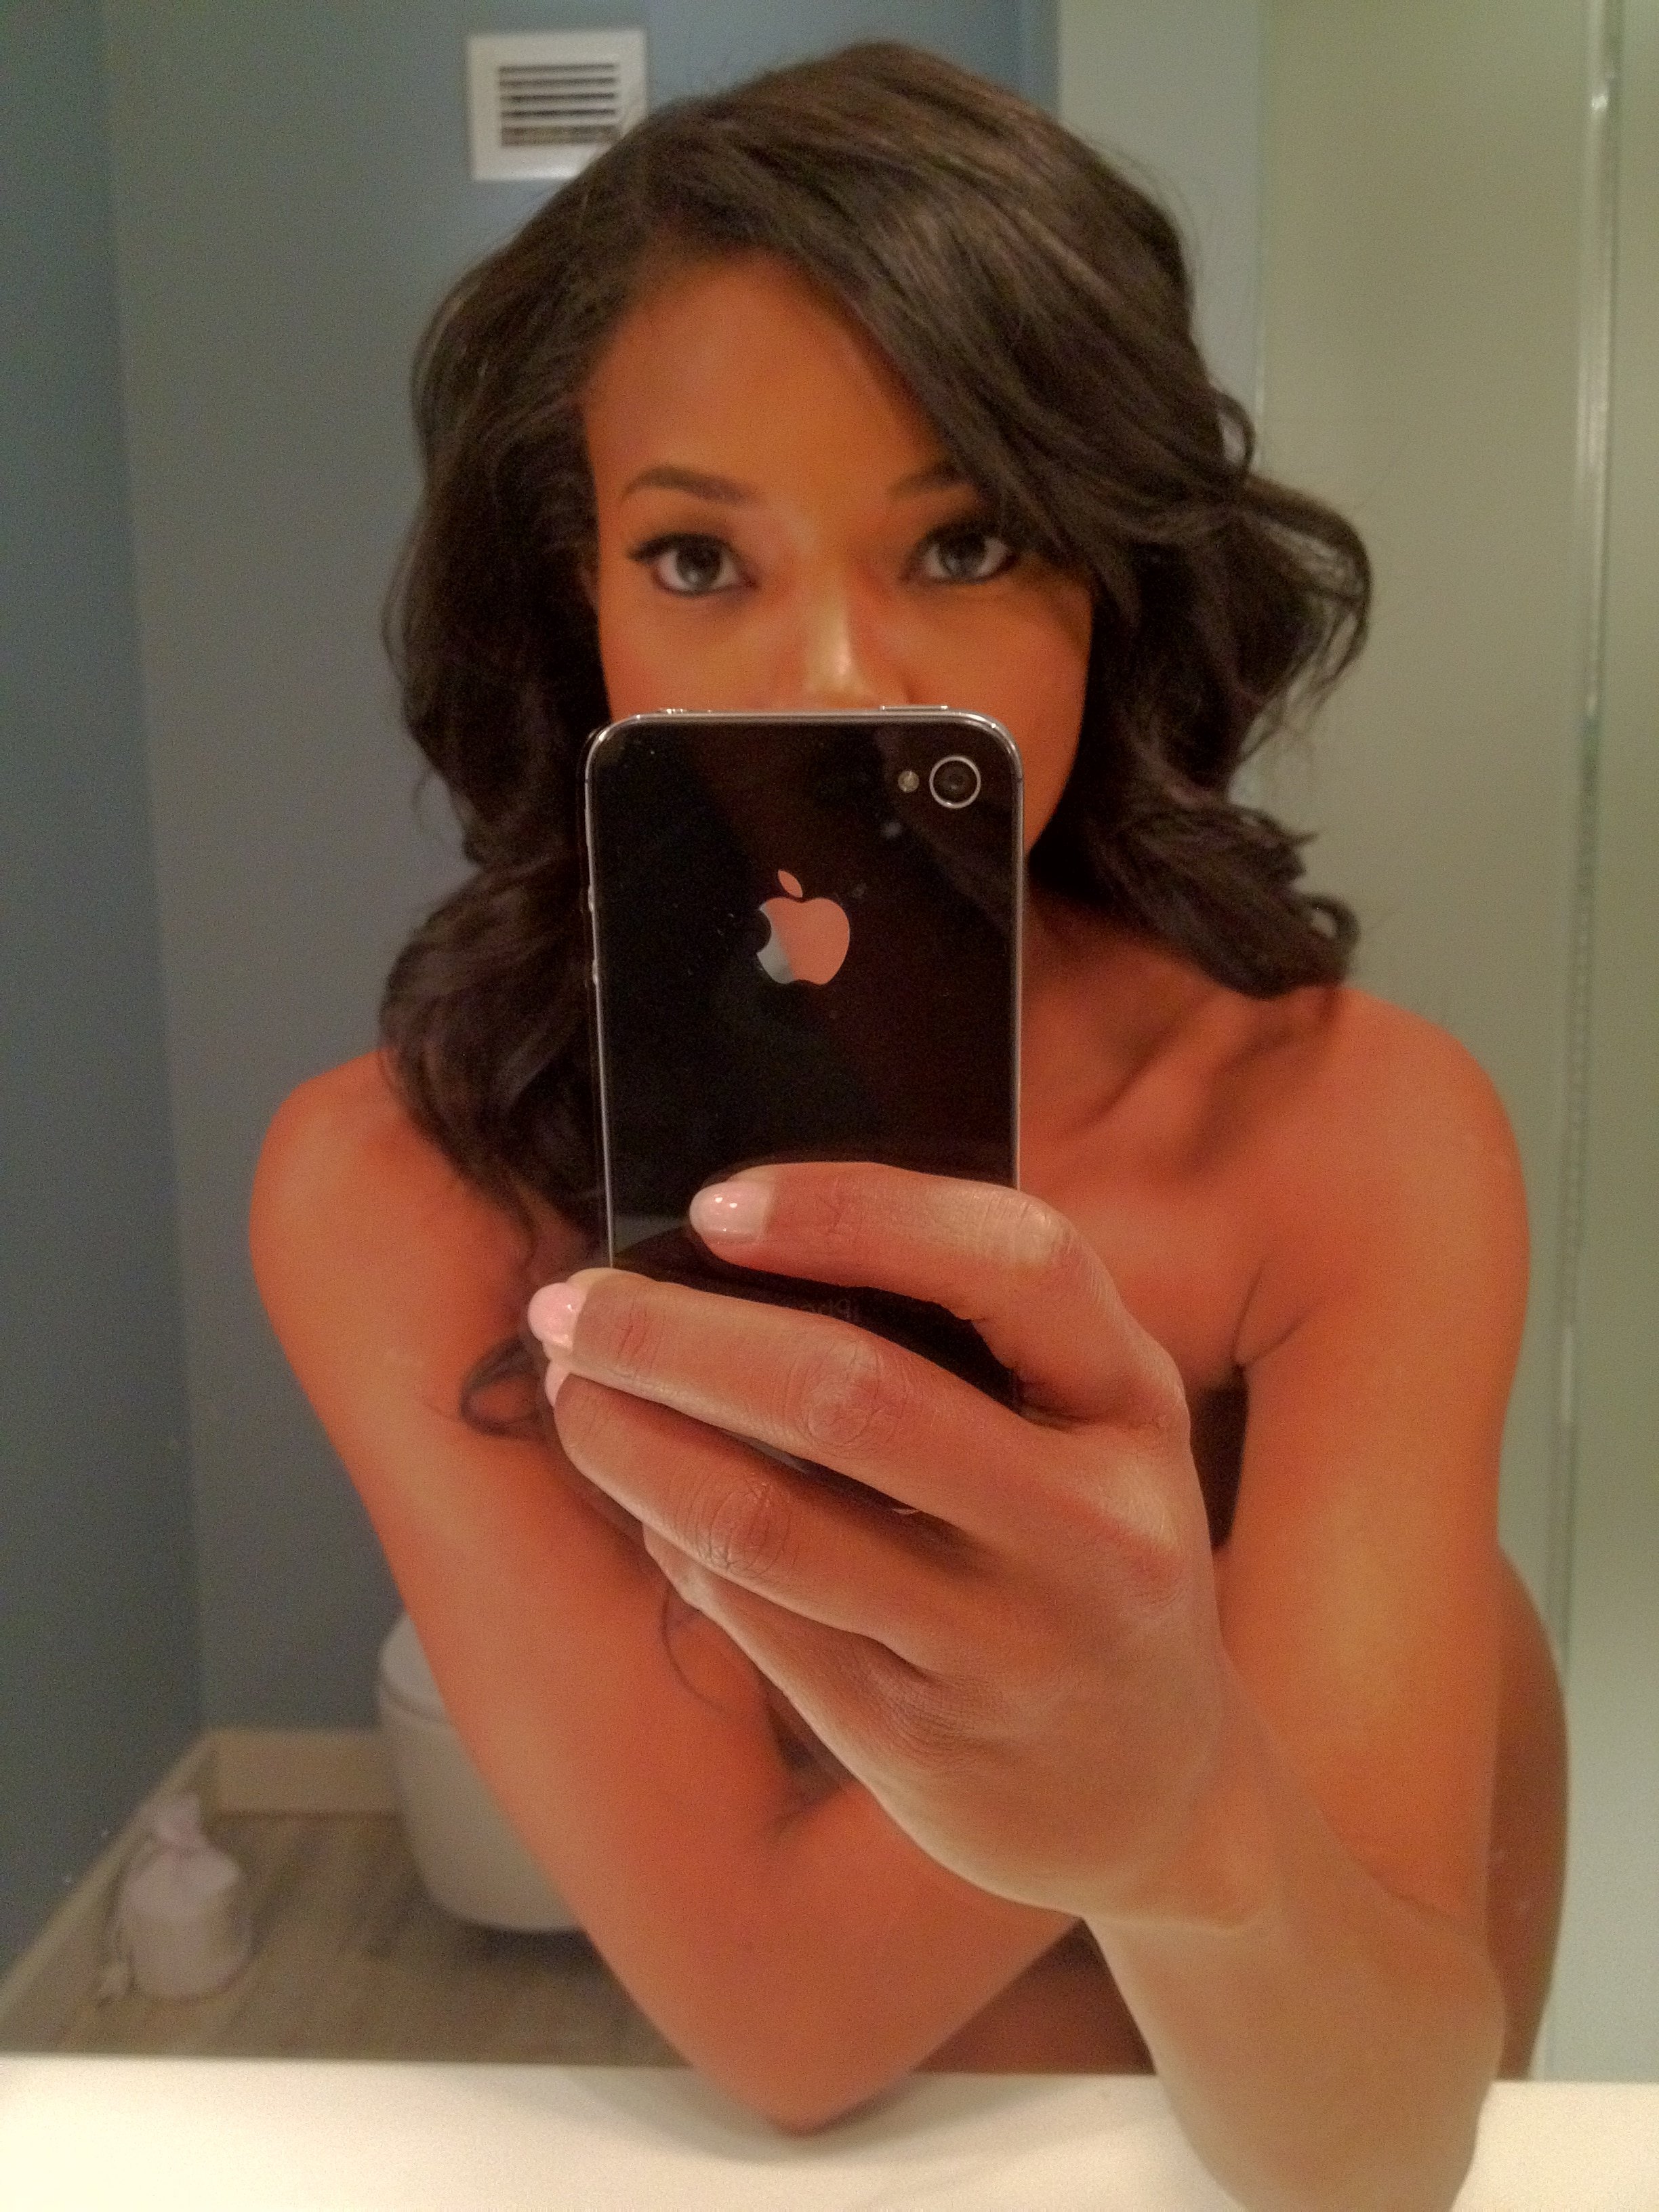 Gabrielle Union Nude Fappening Pics - photo of the actress taking a bathroom selfie with her boobs covered by her arms